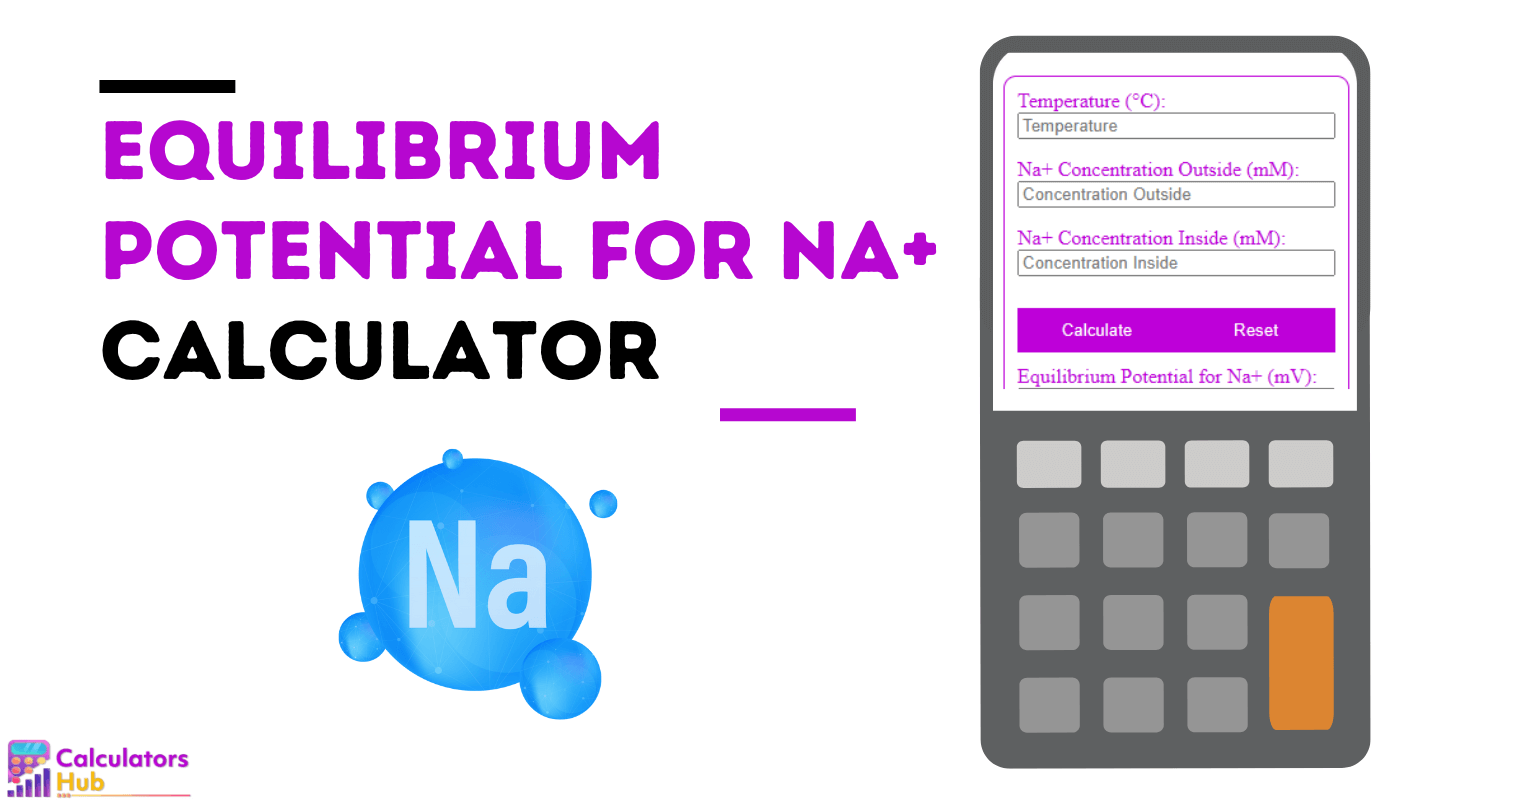 Equilibrium Potential for Na+ Calculator